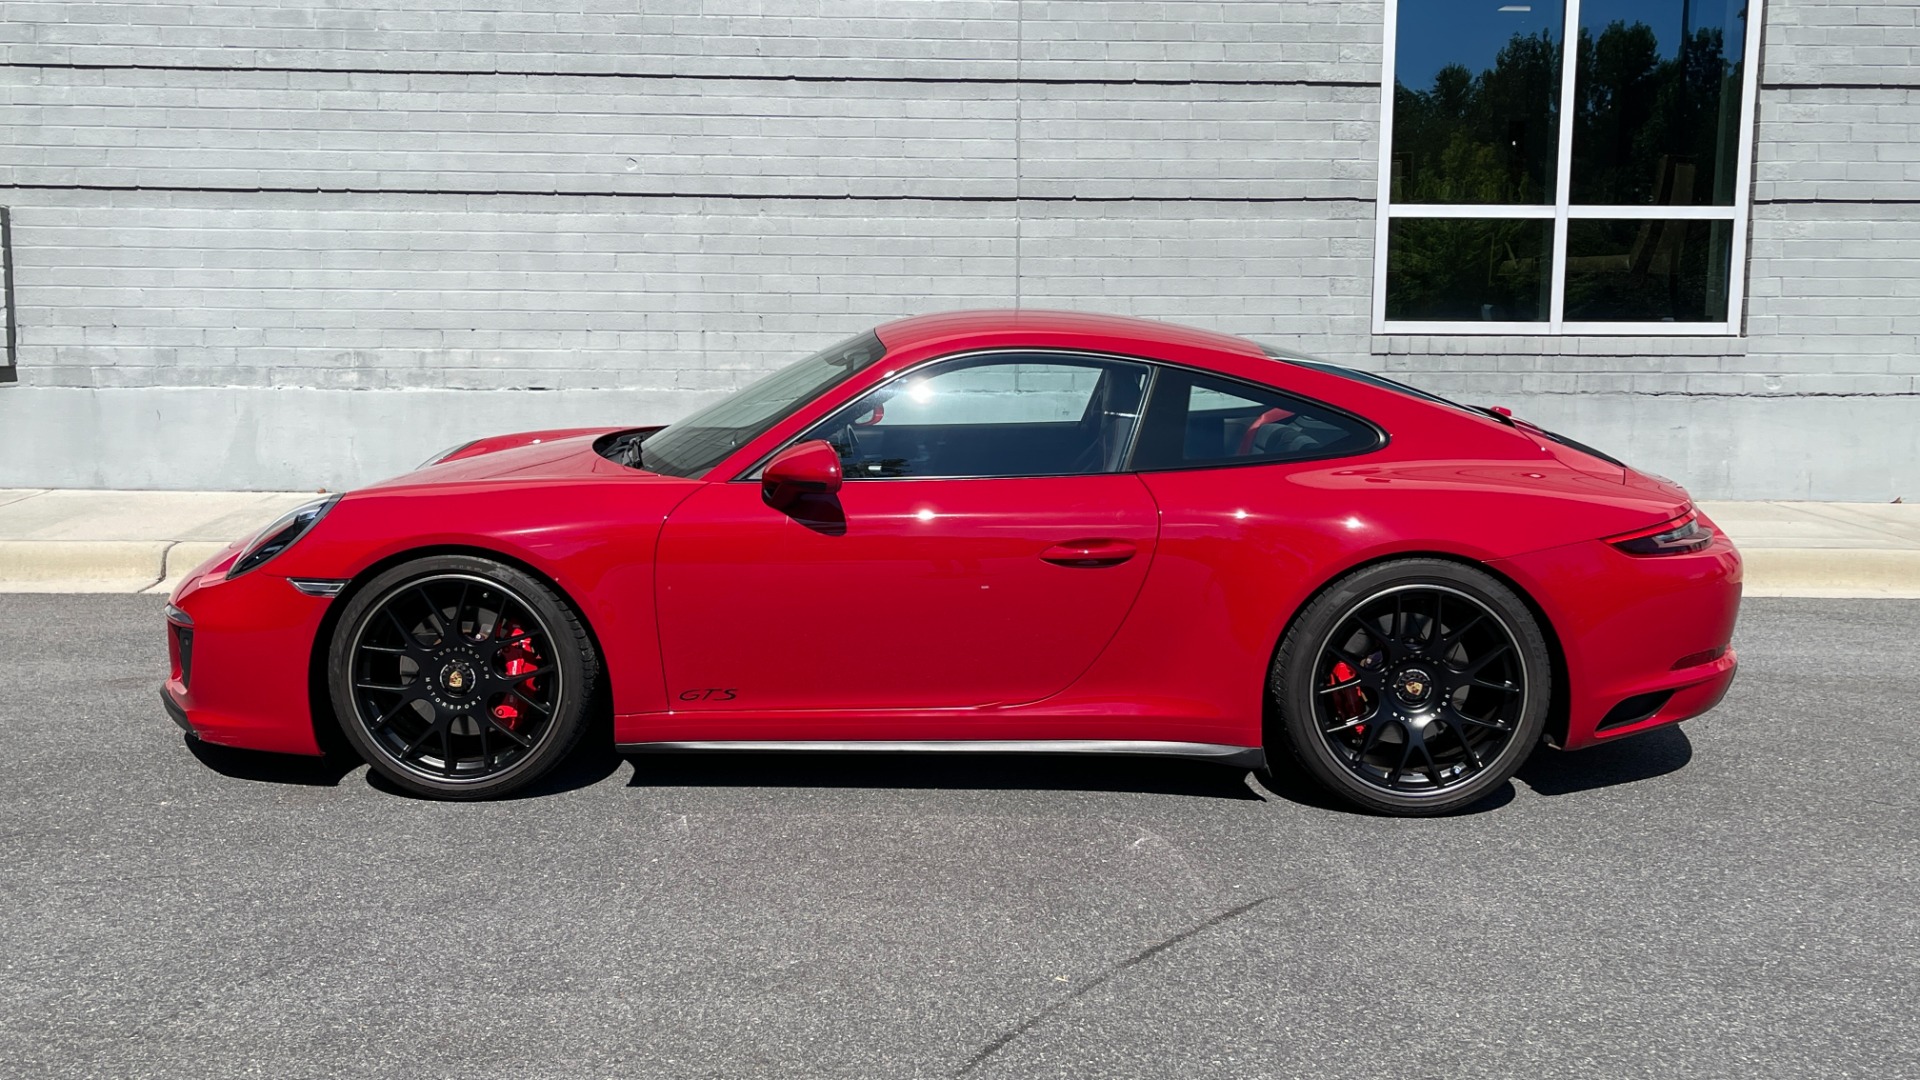 Used 2019 Porsche 911 Carrera GTS / TITANIUM EXHAUST / CARBON FIBER / TECHART SPRINGS / BBS WHEEL for sale $123,995 at Formula Imports in Charlotte NC 28227 16